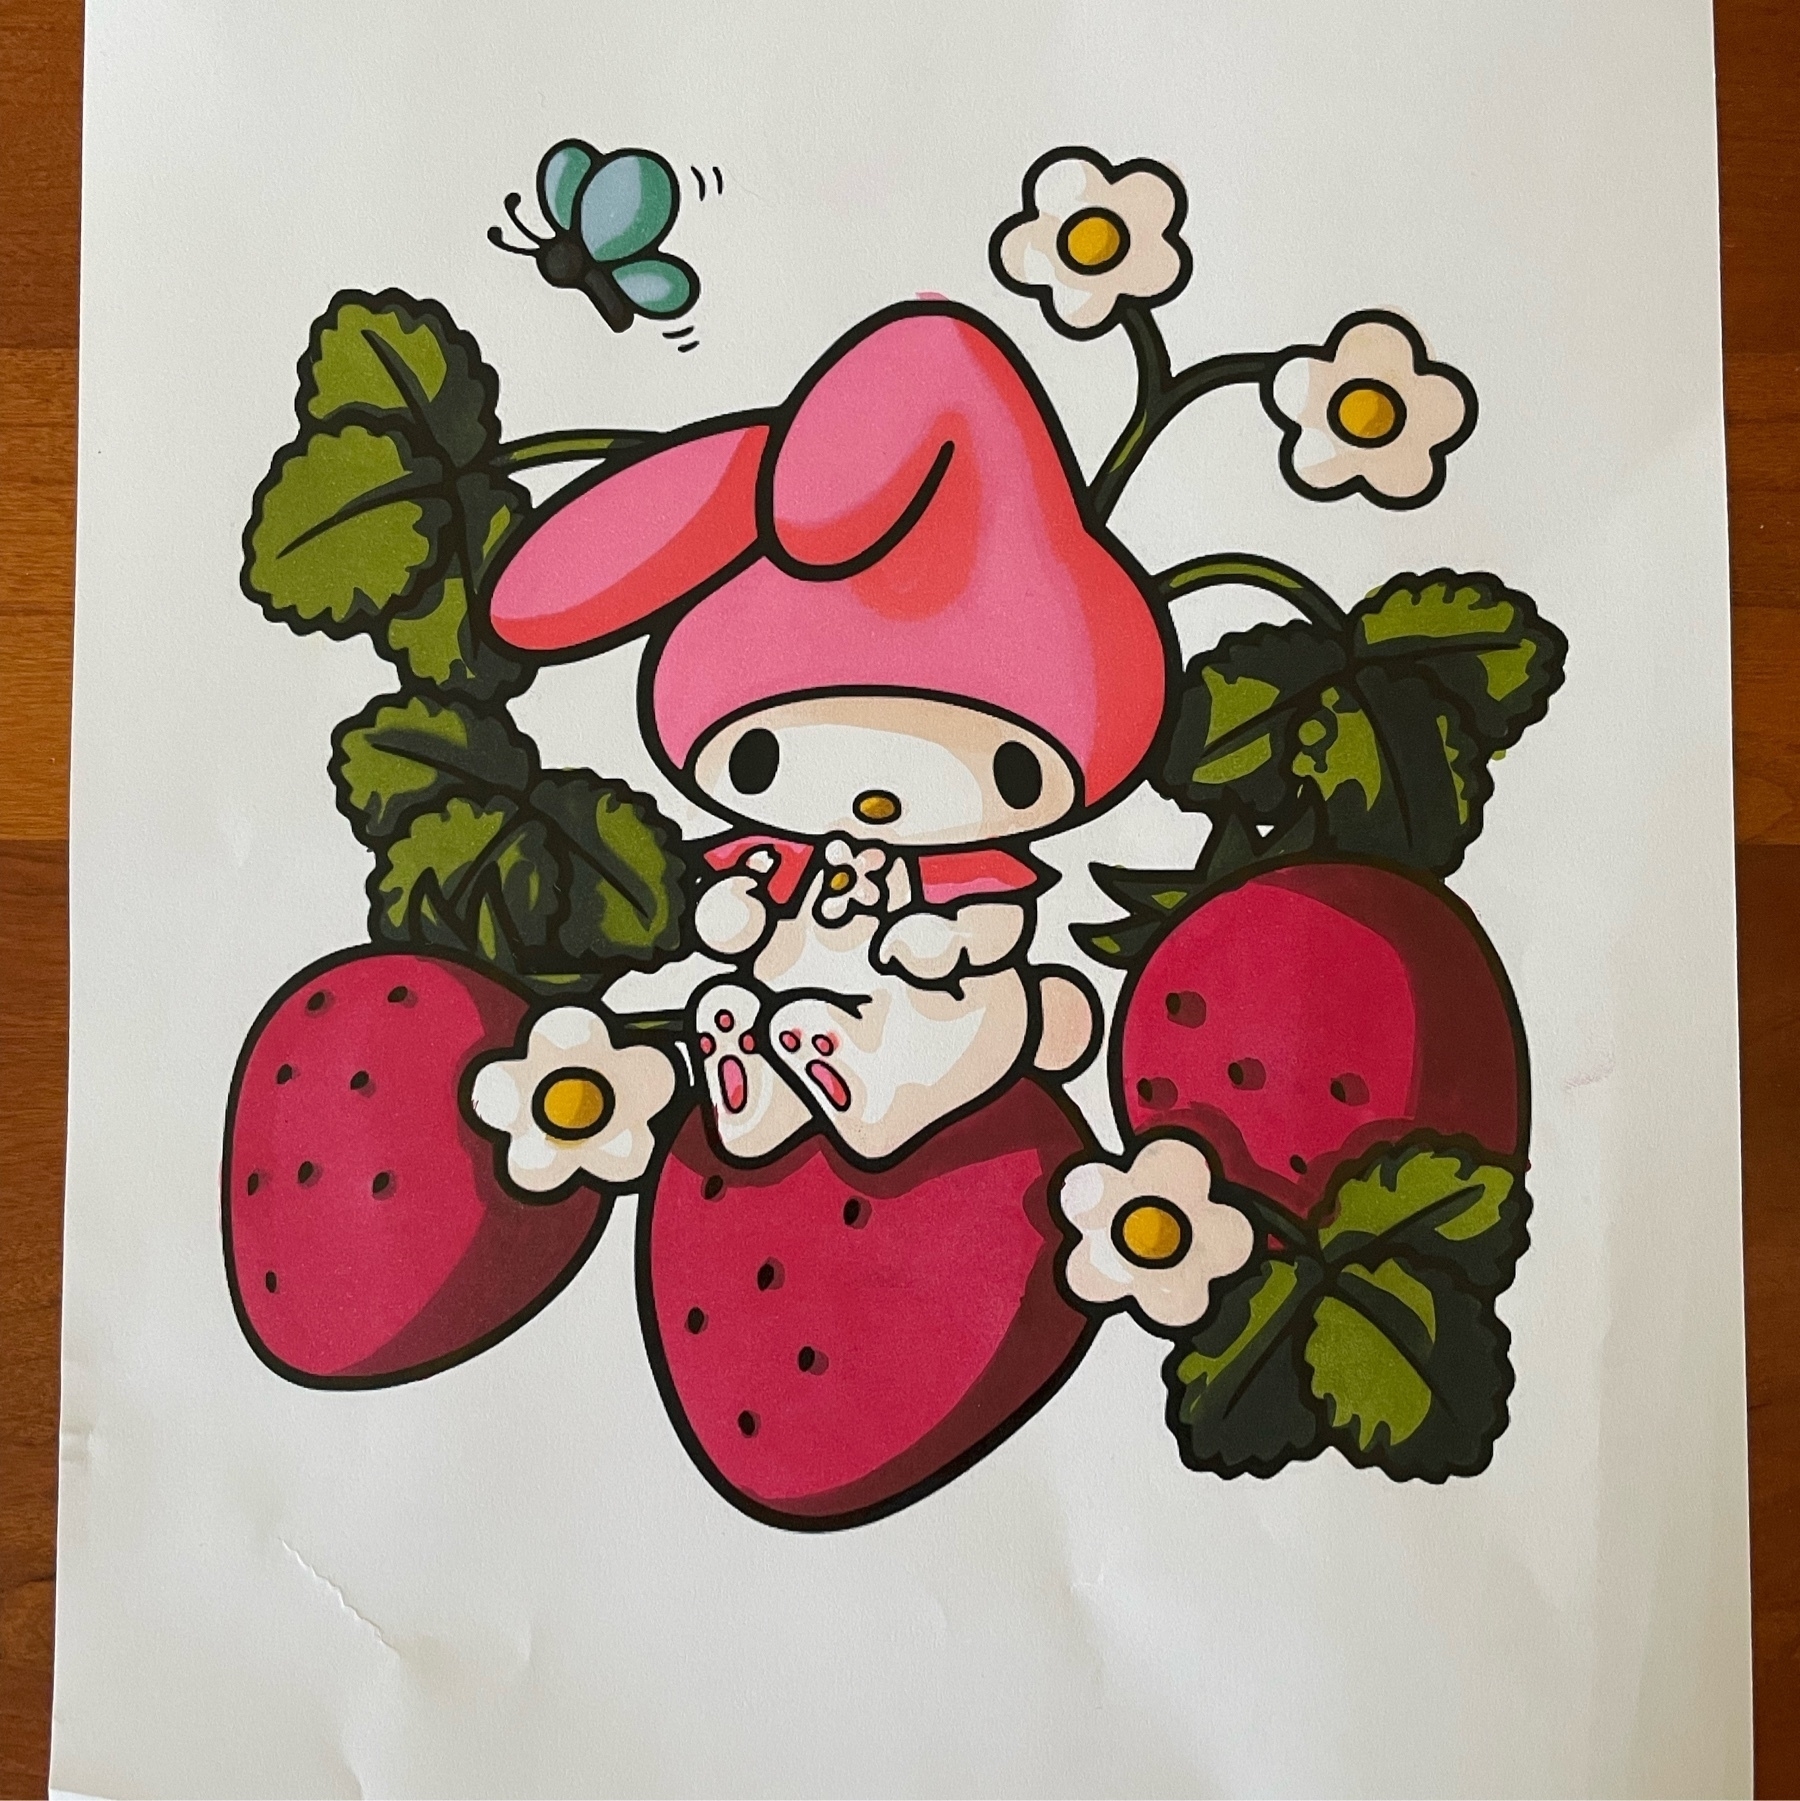 Tiny rabbit character sits atop some strawberries as an even smaller butterfly flies by